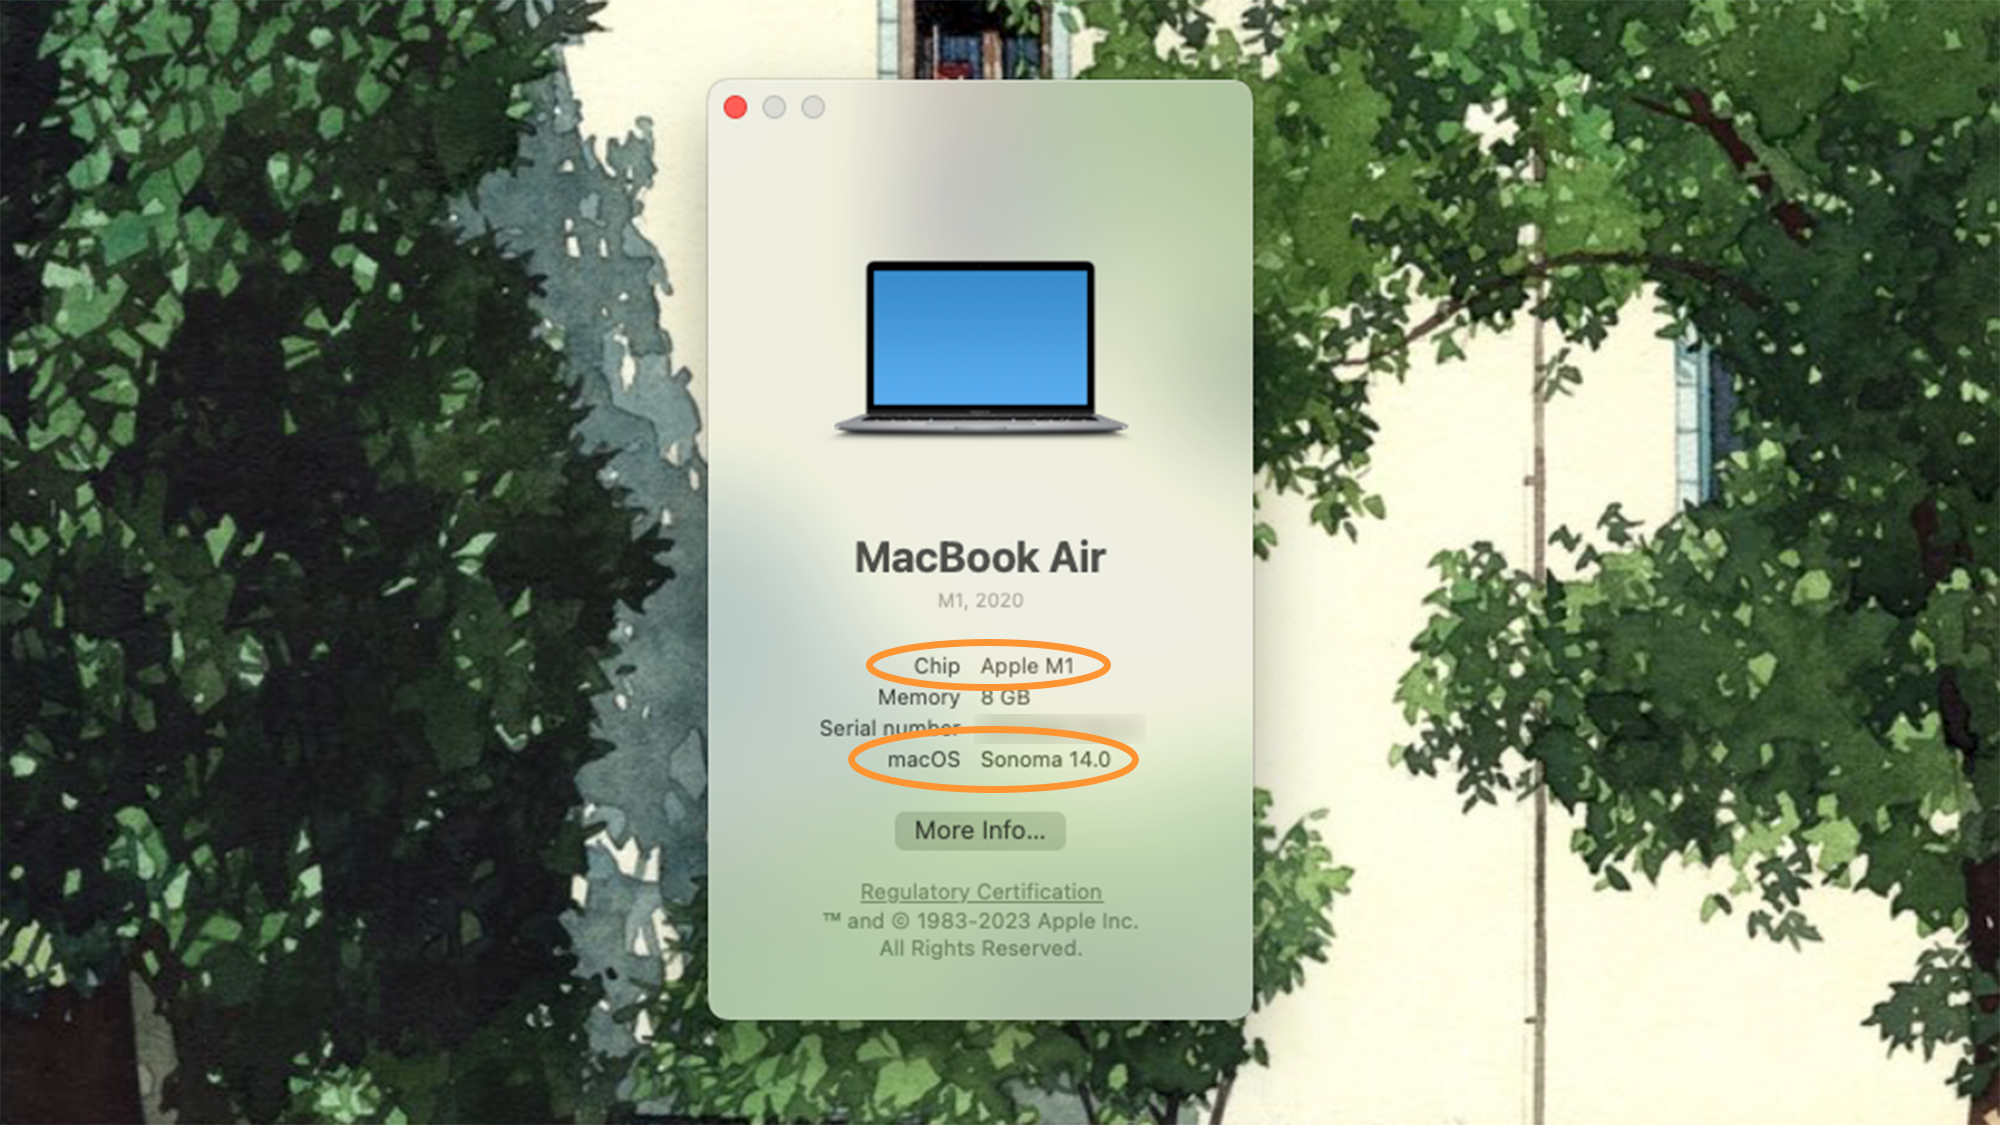 About this Mac information window